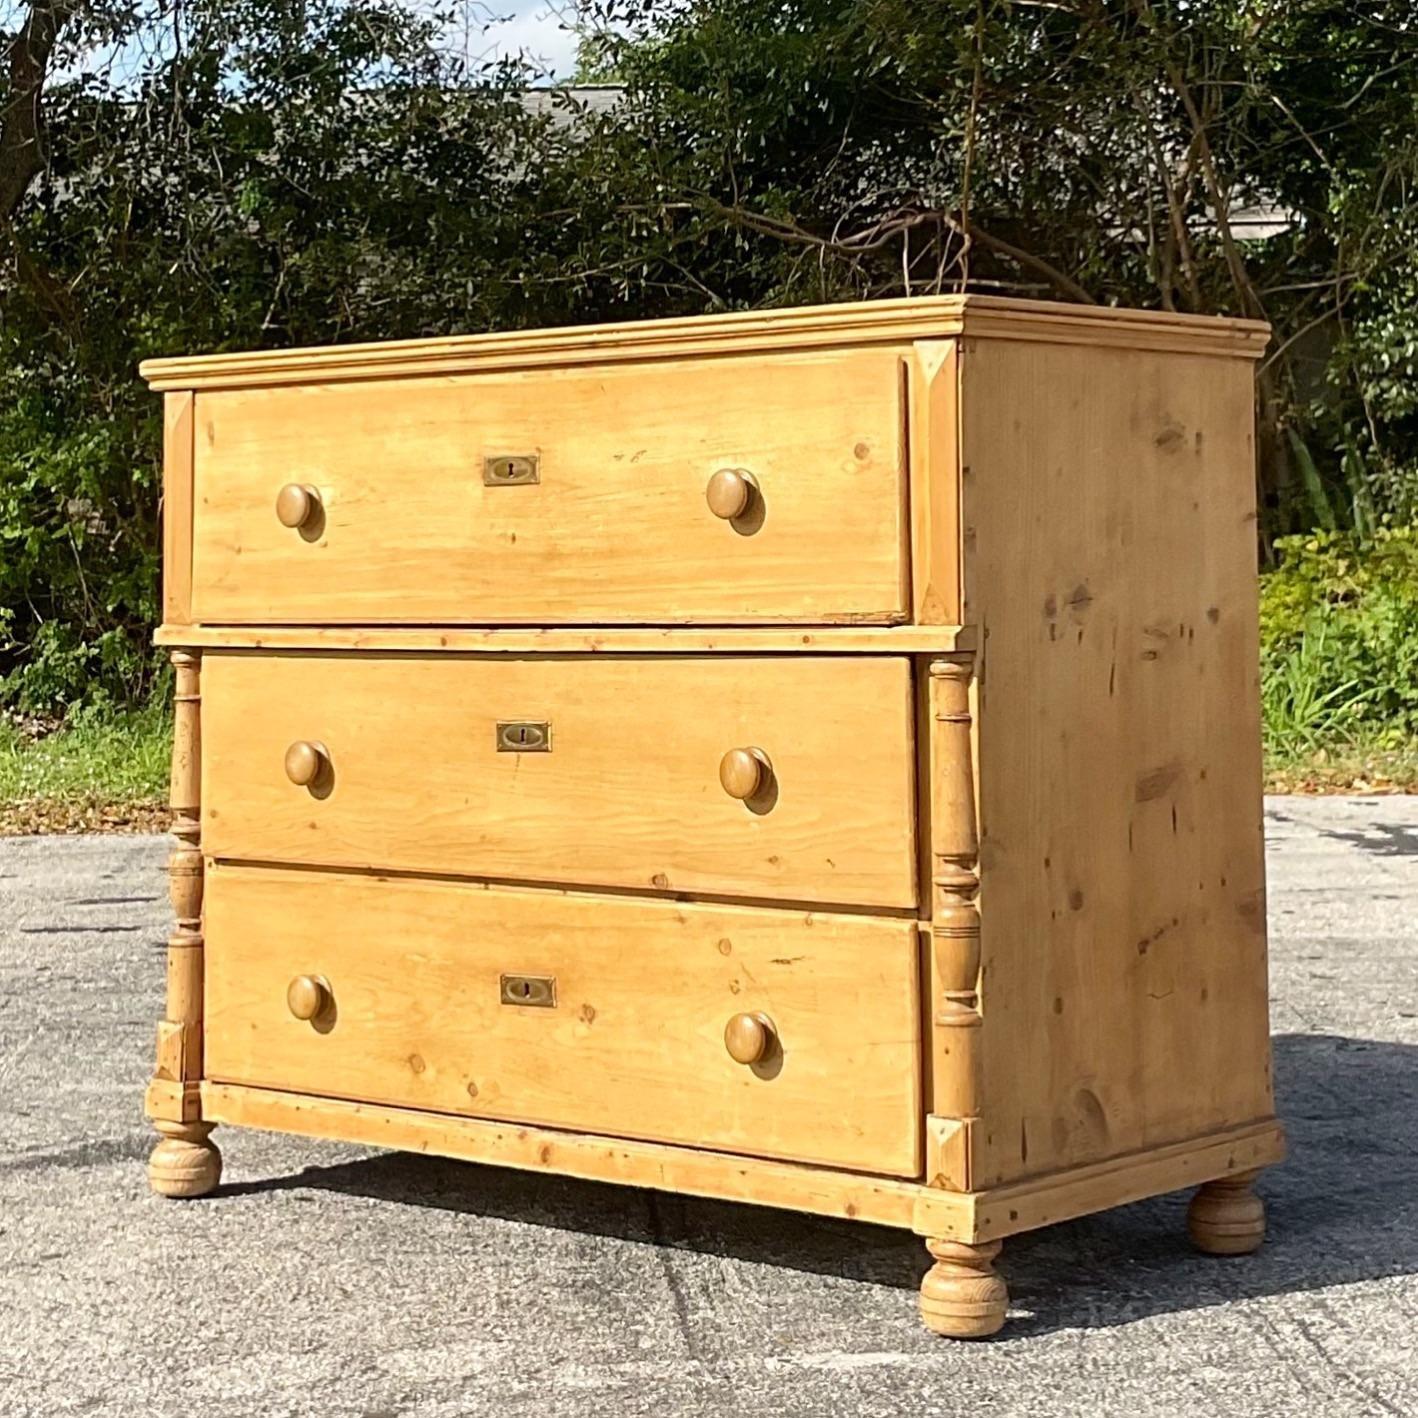 A fabulous vintage Boho chest of drawers. A chic pine cabinet with gorgeous wood carved detail. Purchased in Paris 25 years ago and brought to the states. Acquired from a Palm Beach estate.